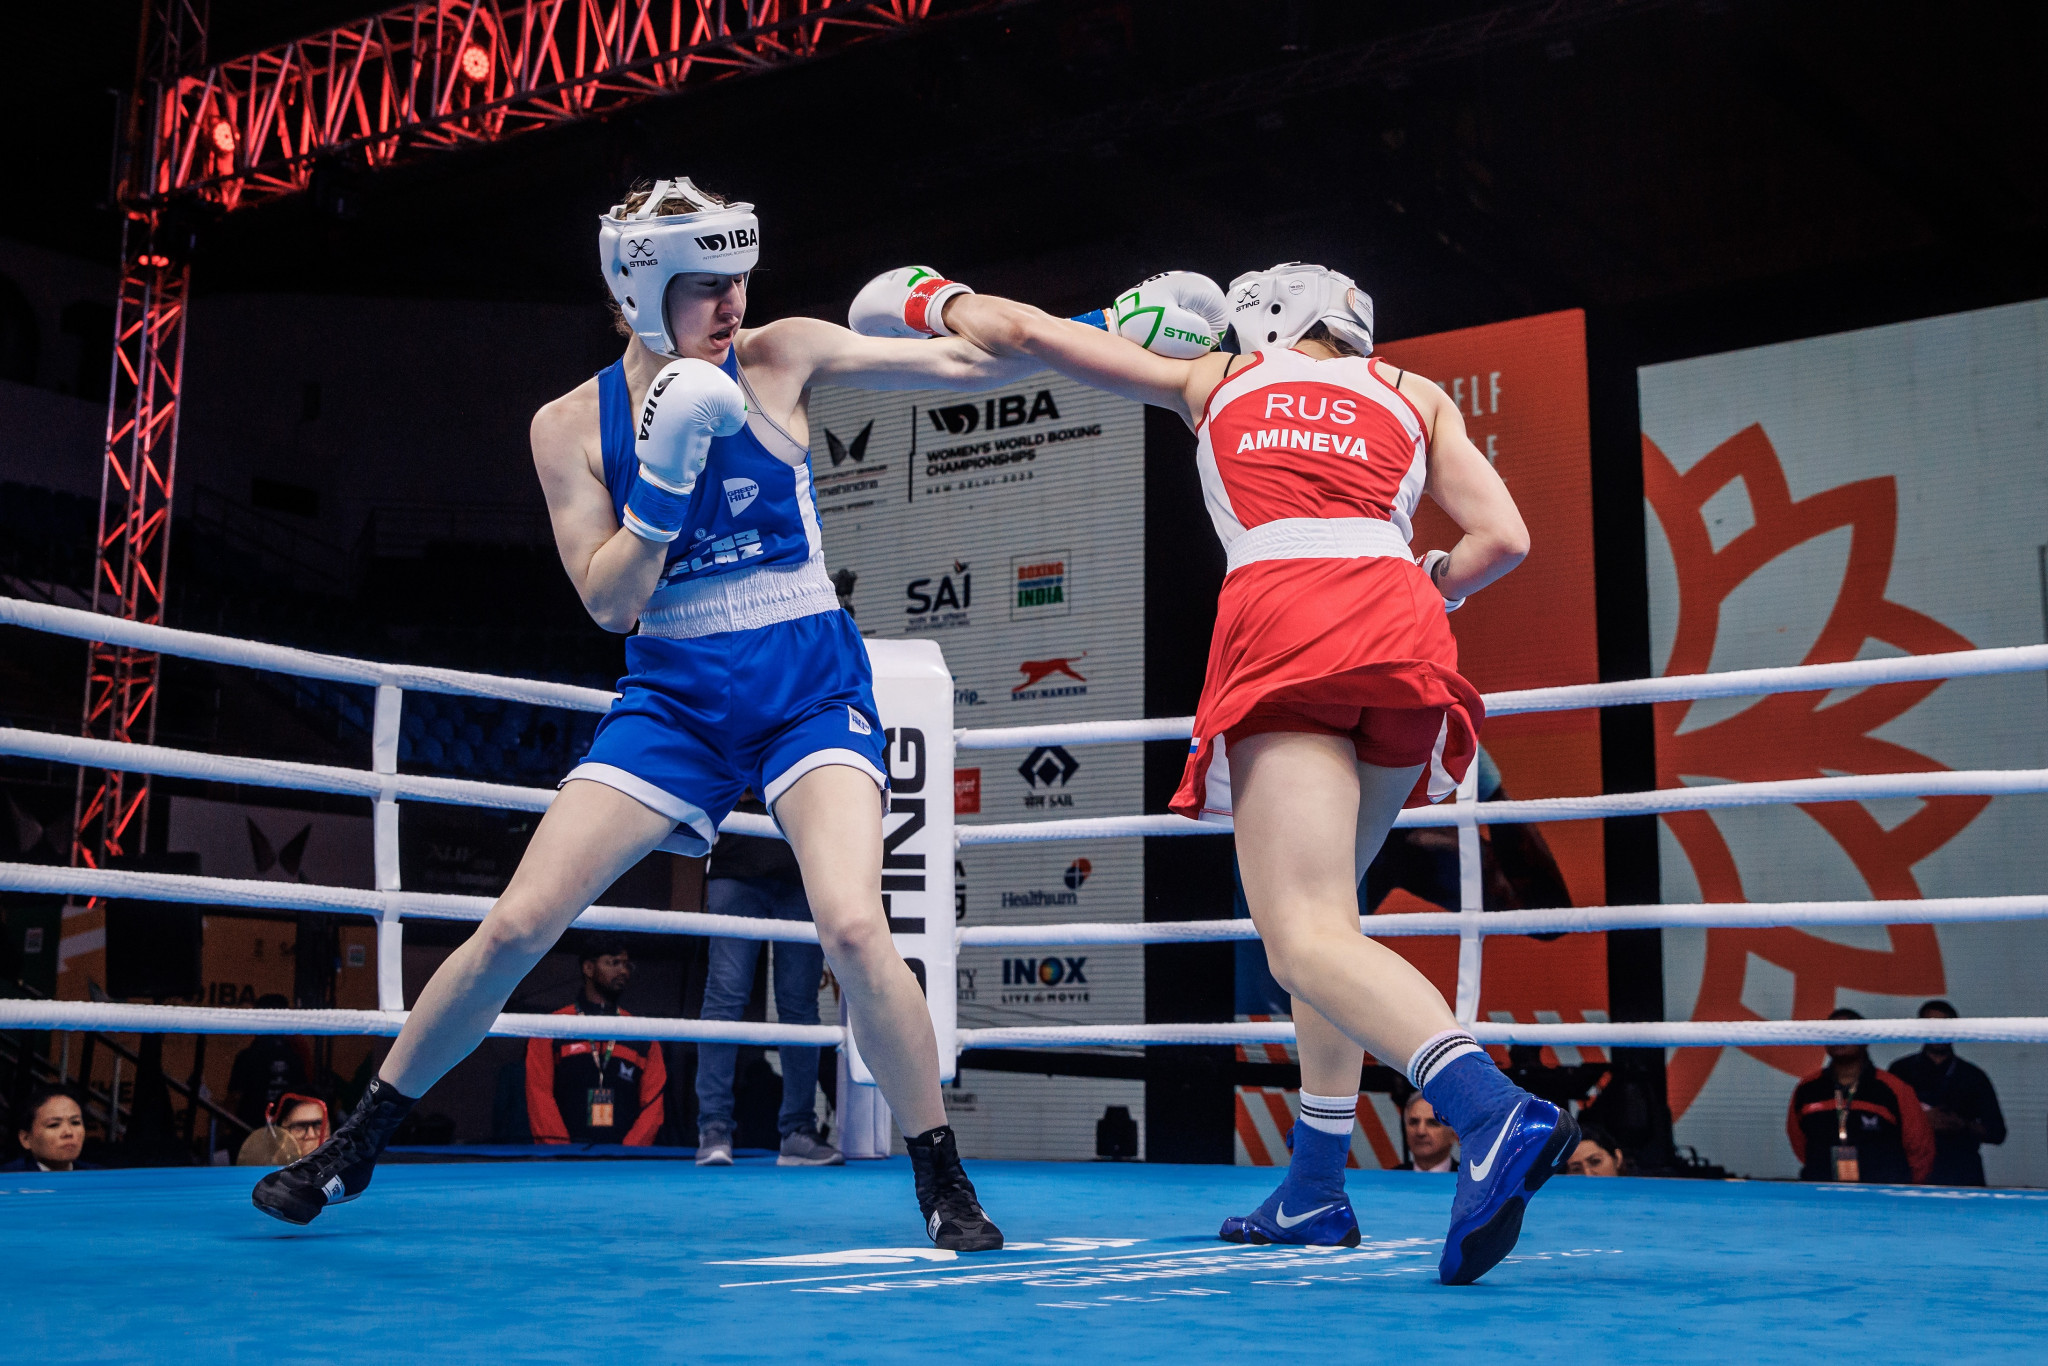 Russia beat Belarus in hat-trick of victories at IBA Women’s World Championships